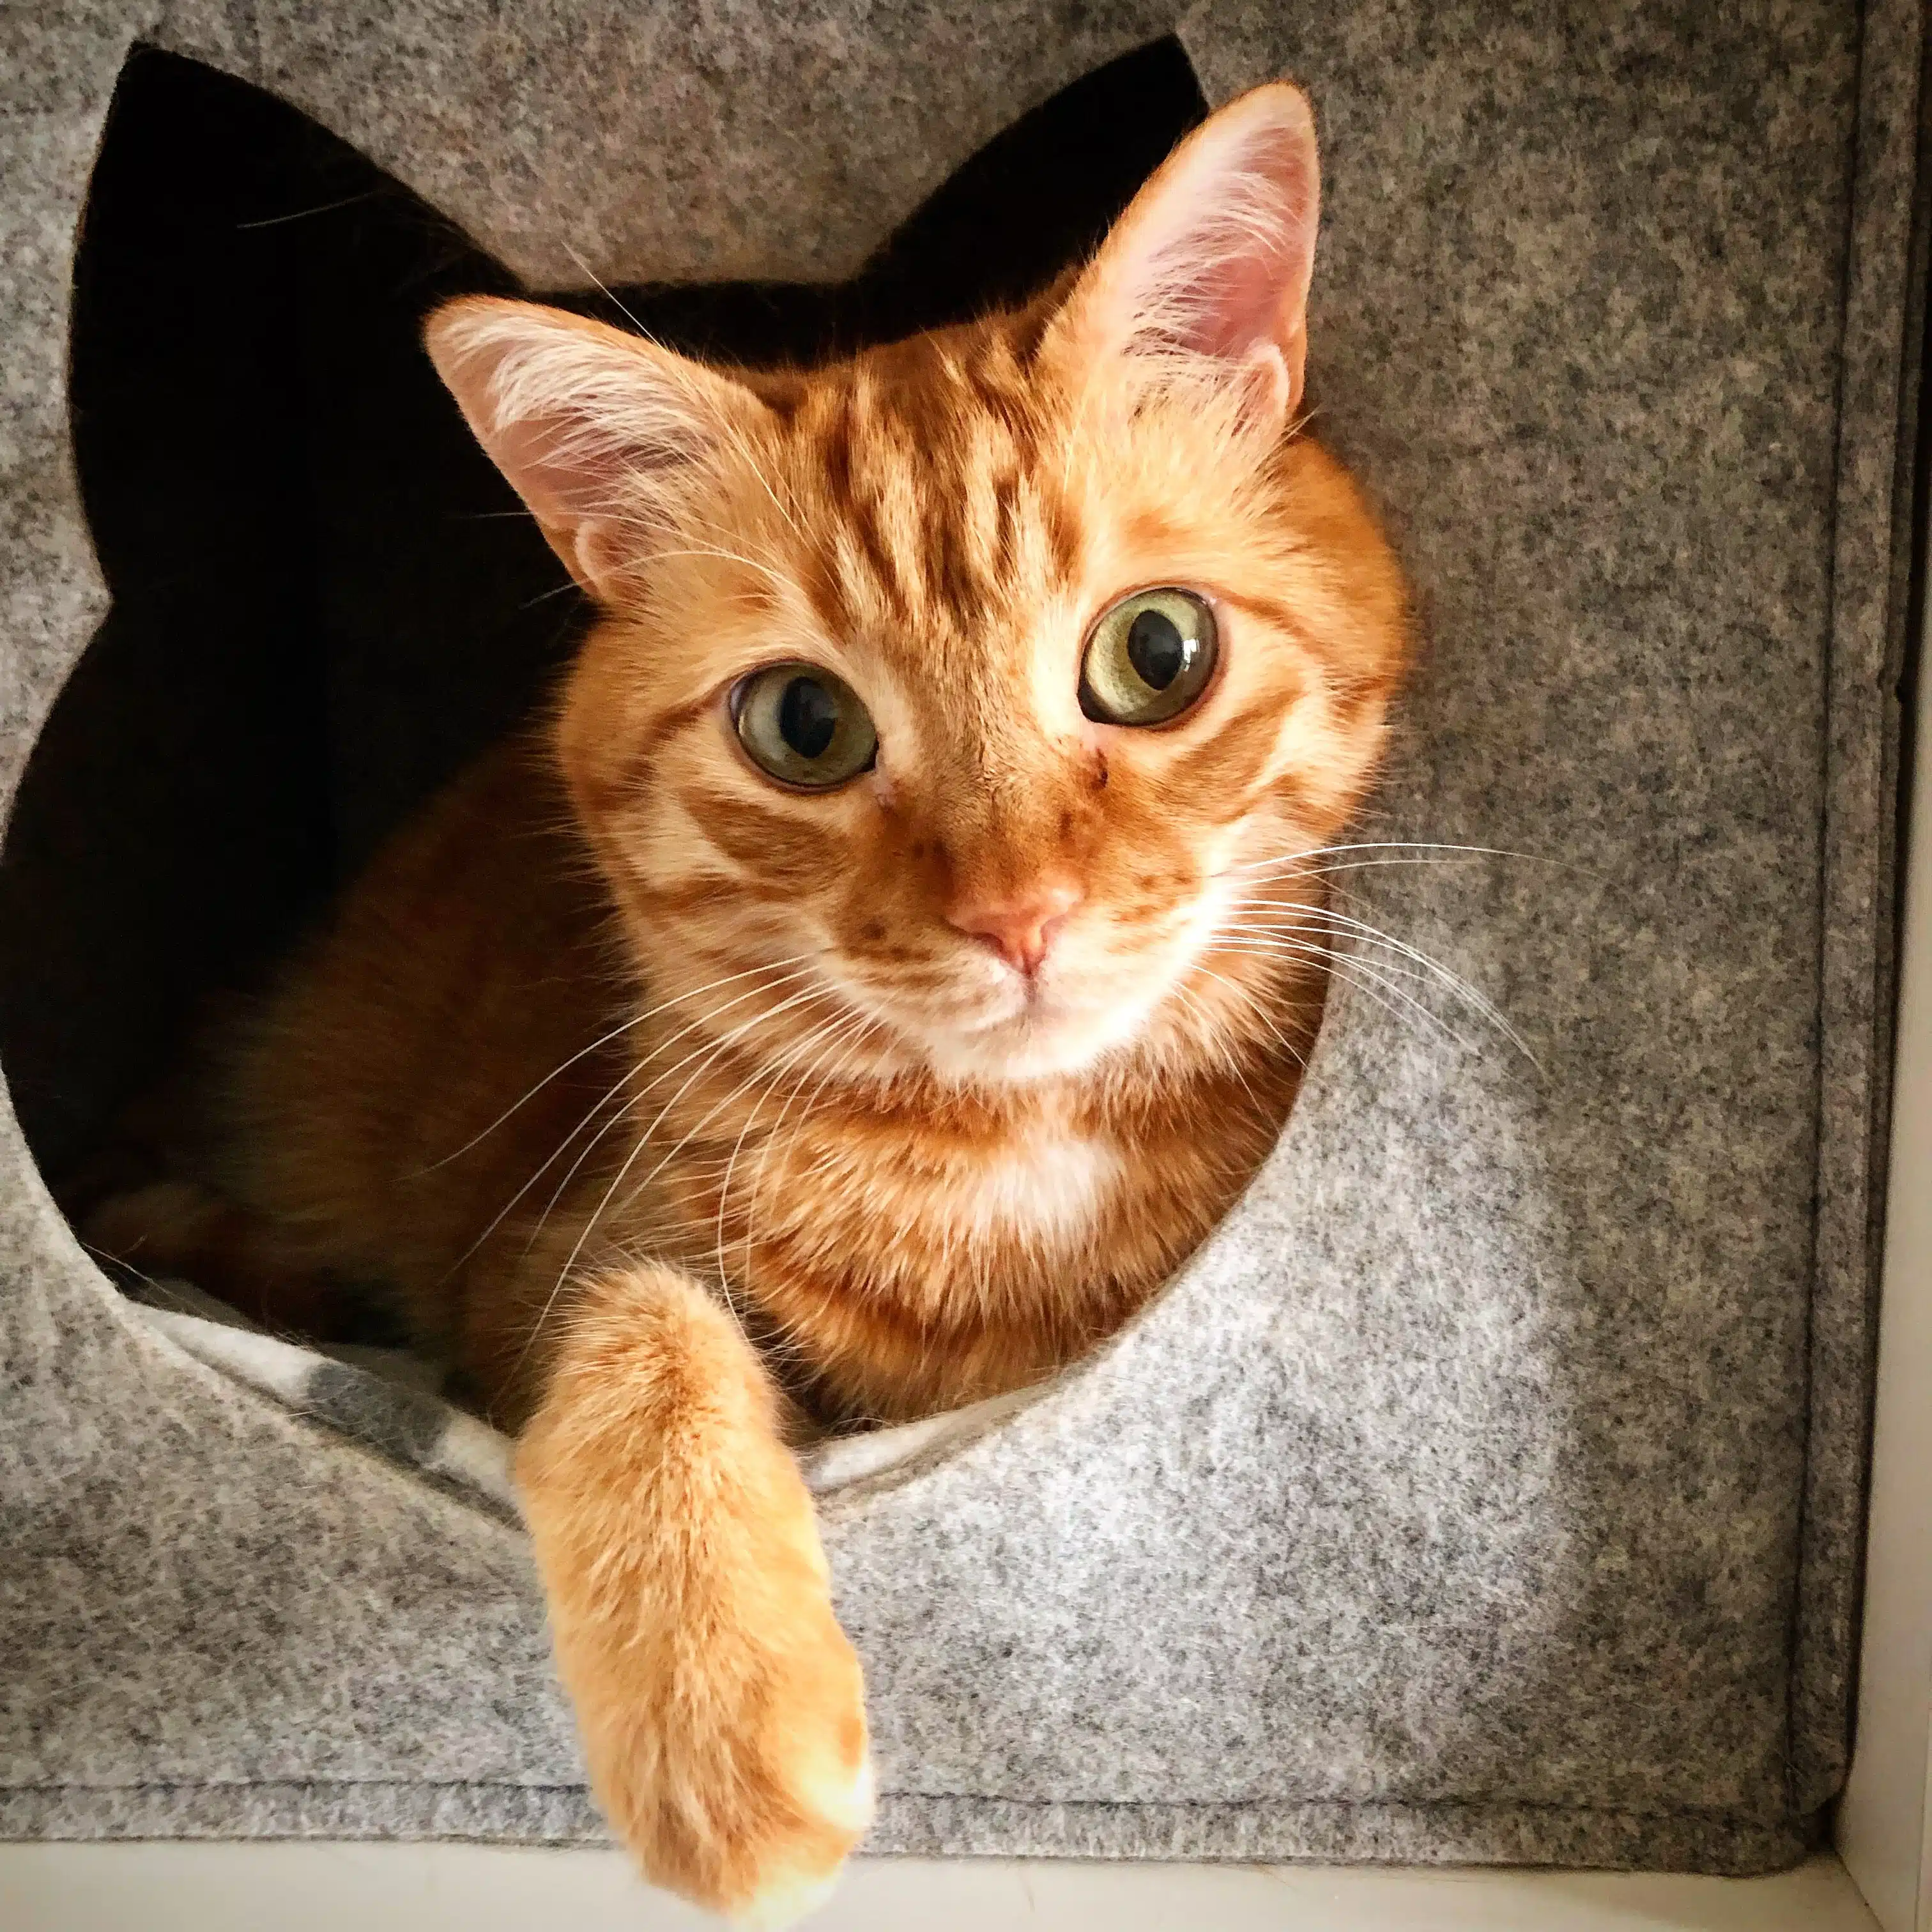 Ginger cat peeks at the camera, as it lounges in its grey boarding kennel.